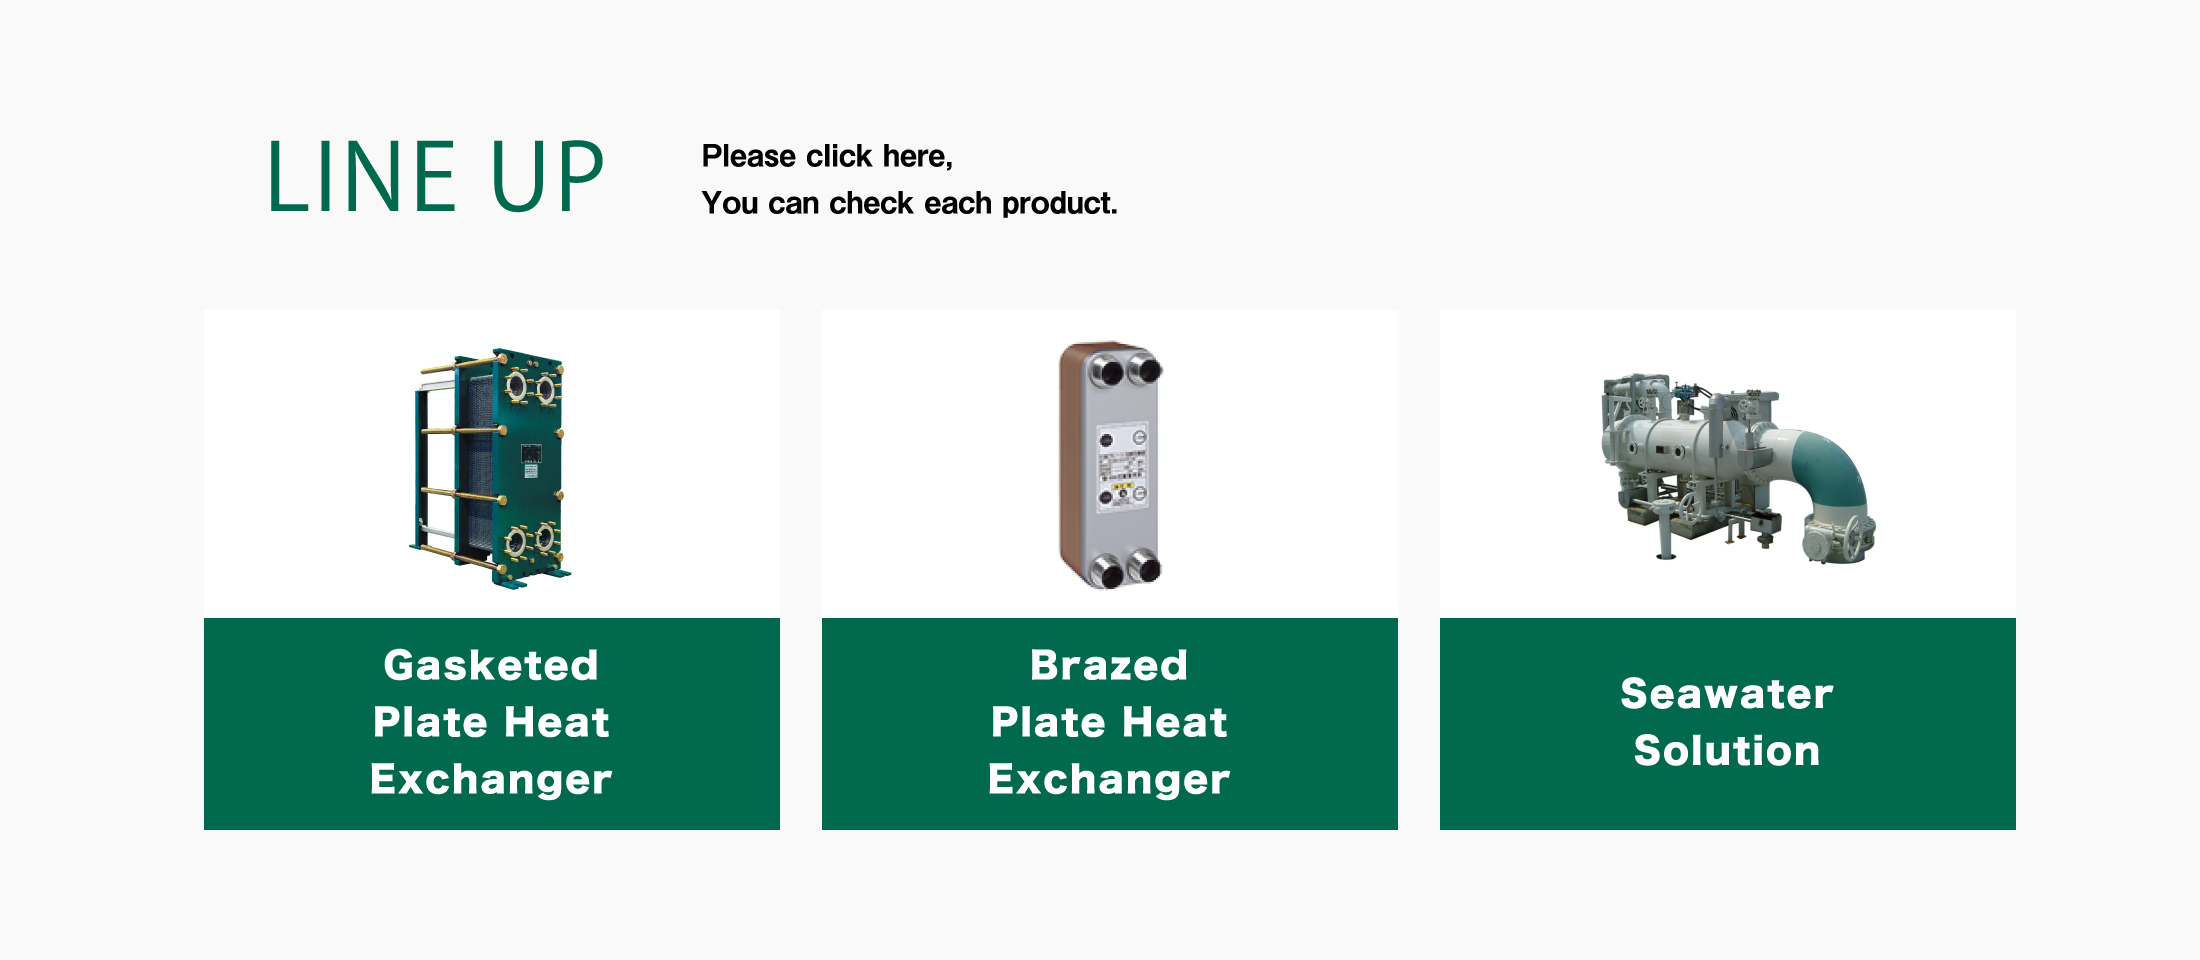 LINE UP Please click here, You can check each product. Gasketed Plate Heat Exchanger Brazed Plate Heat Exchanger Welded Plate Head Exchanger Thermal Unit Auto Strainer